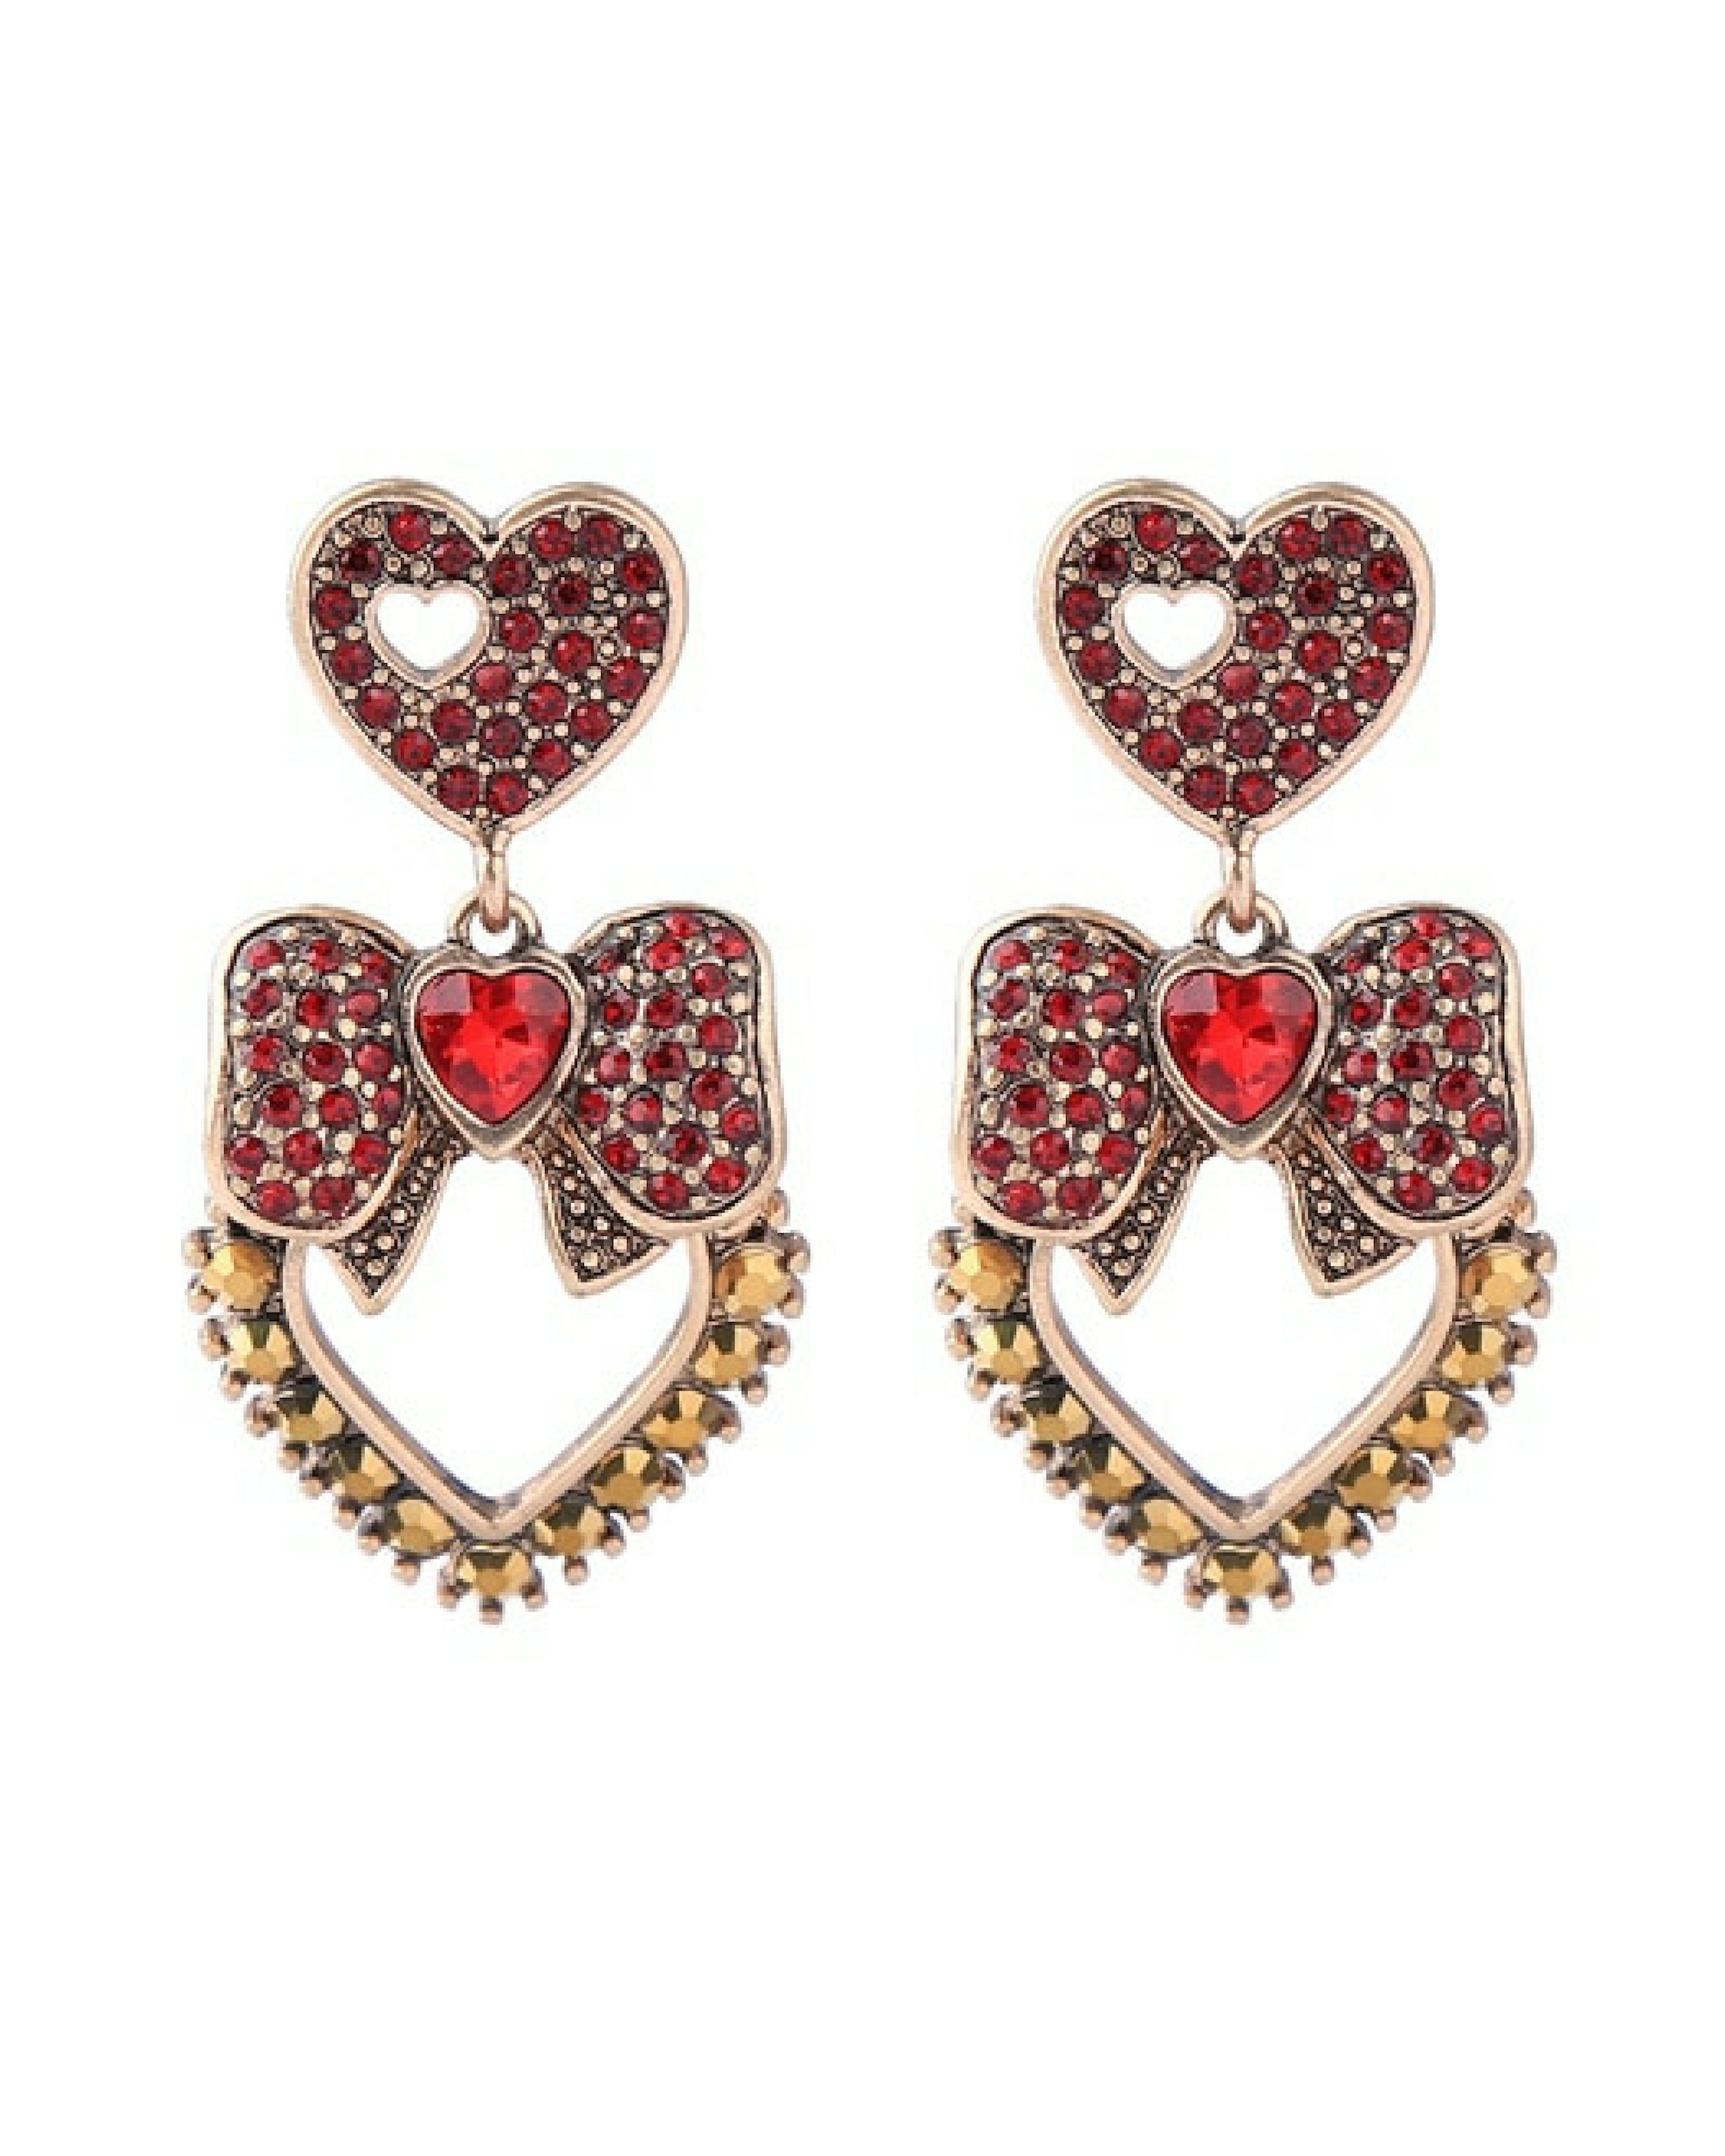 Romantic red crystal earrings by Streethopper | The Secret Label